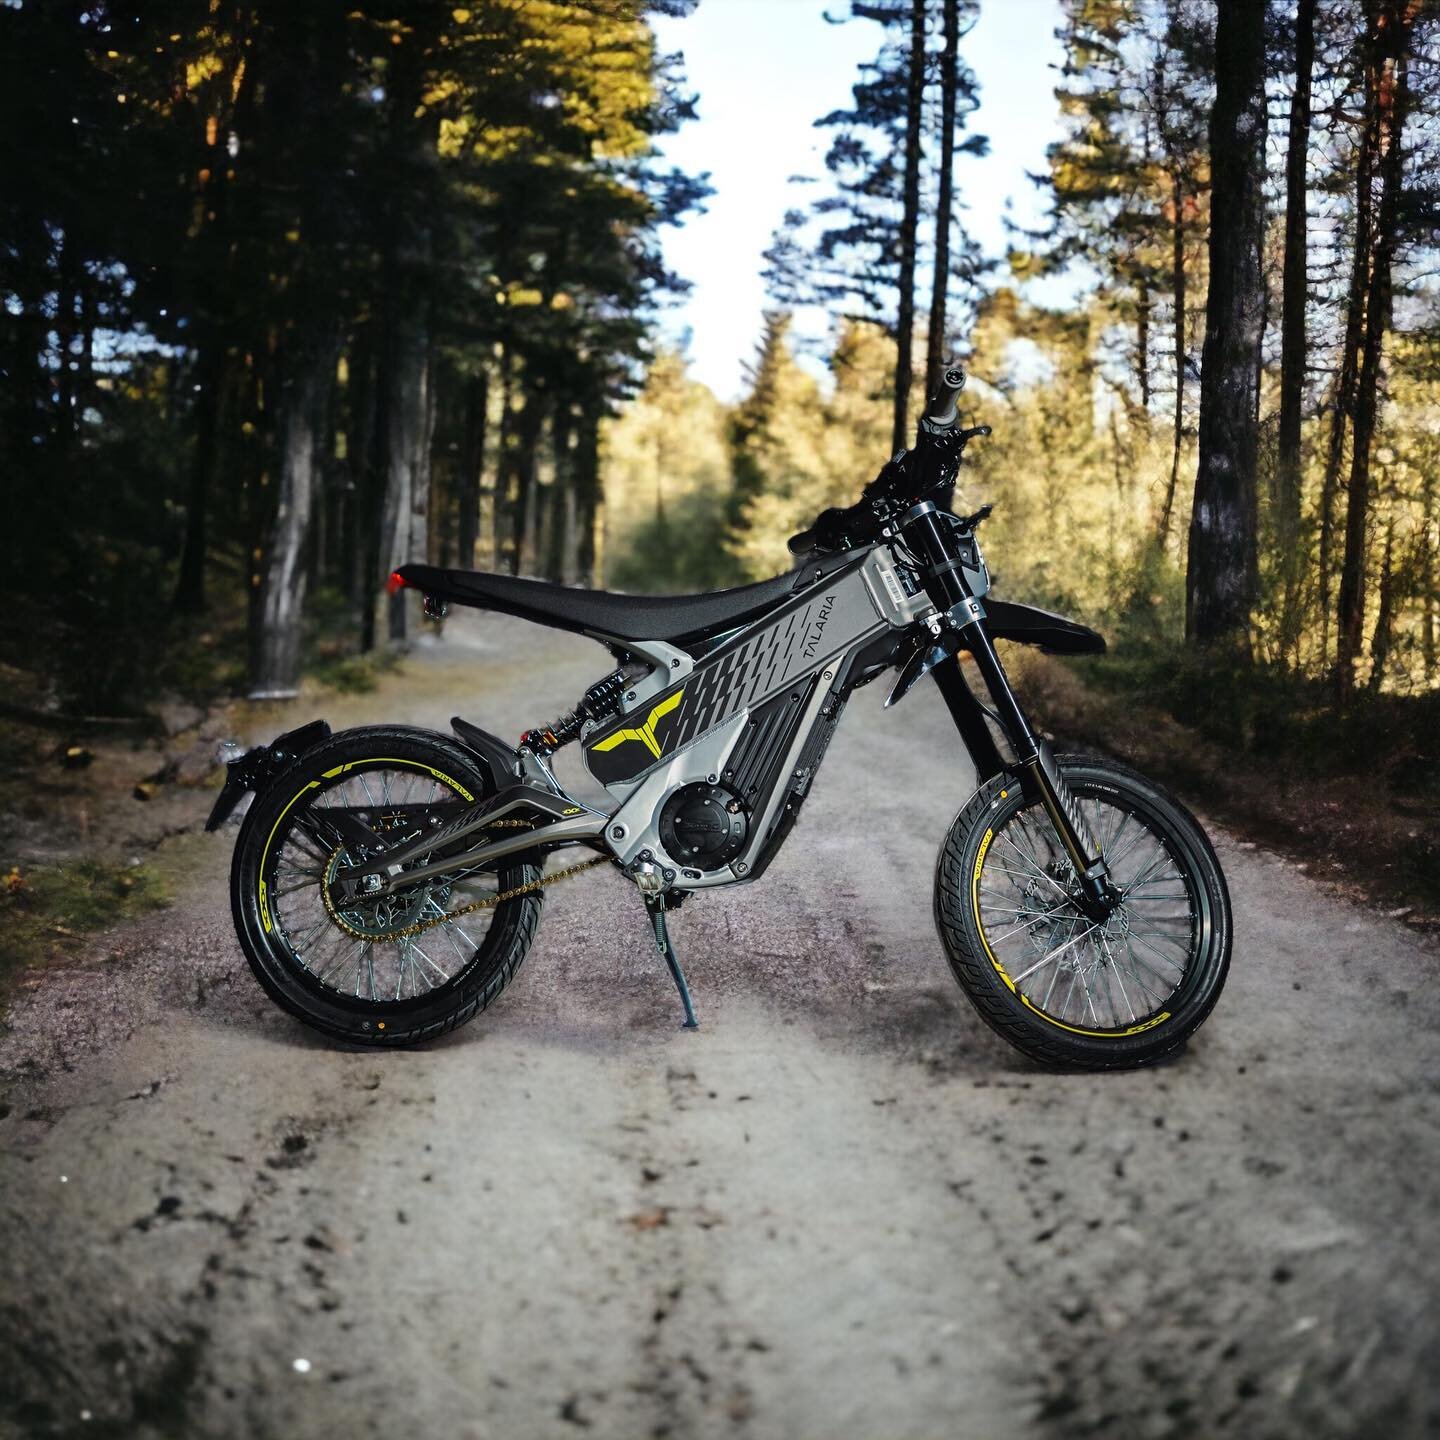 Incoming shipment with the TALARIA xXx 🚢 

Preorders now open - another sellout coming 😎

 #TalariaSting #ElectricRevolution #stingxxx #UnleashThePower #AdventureUnleashed #OffroadThrills #EcoFriendlyRiding #DirtbikeLove #RideWithPassion #Aebikes⚡️